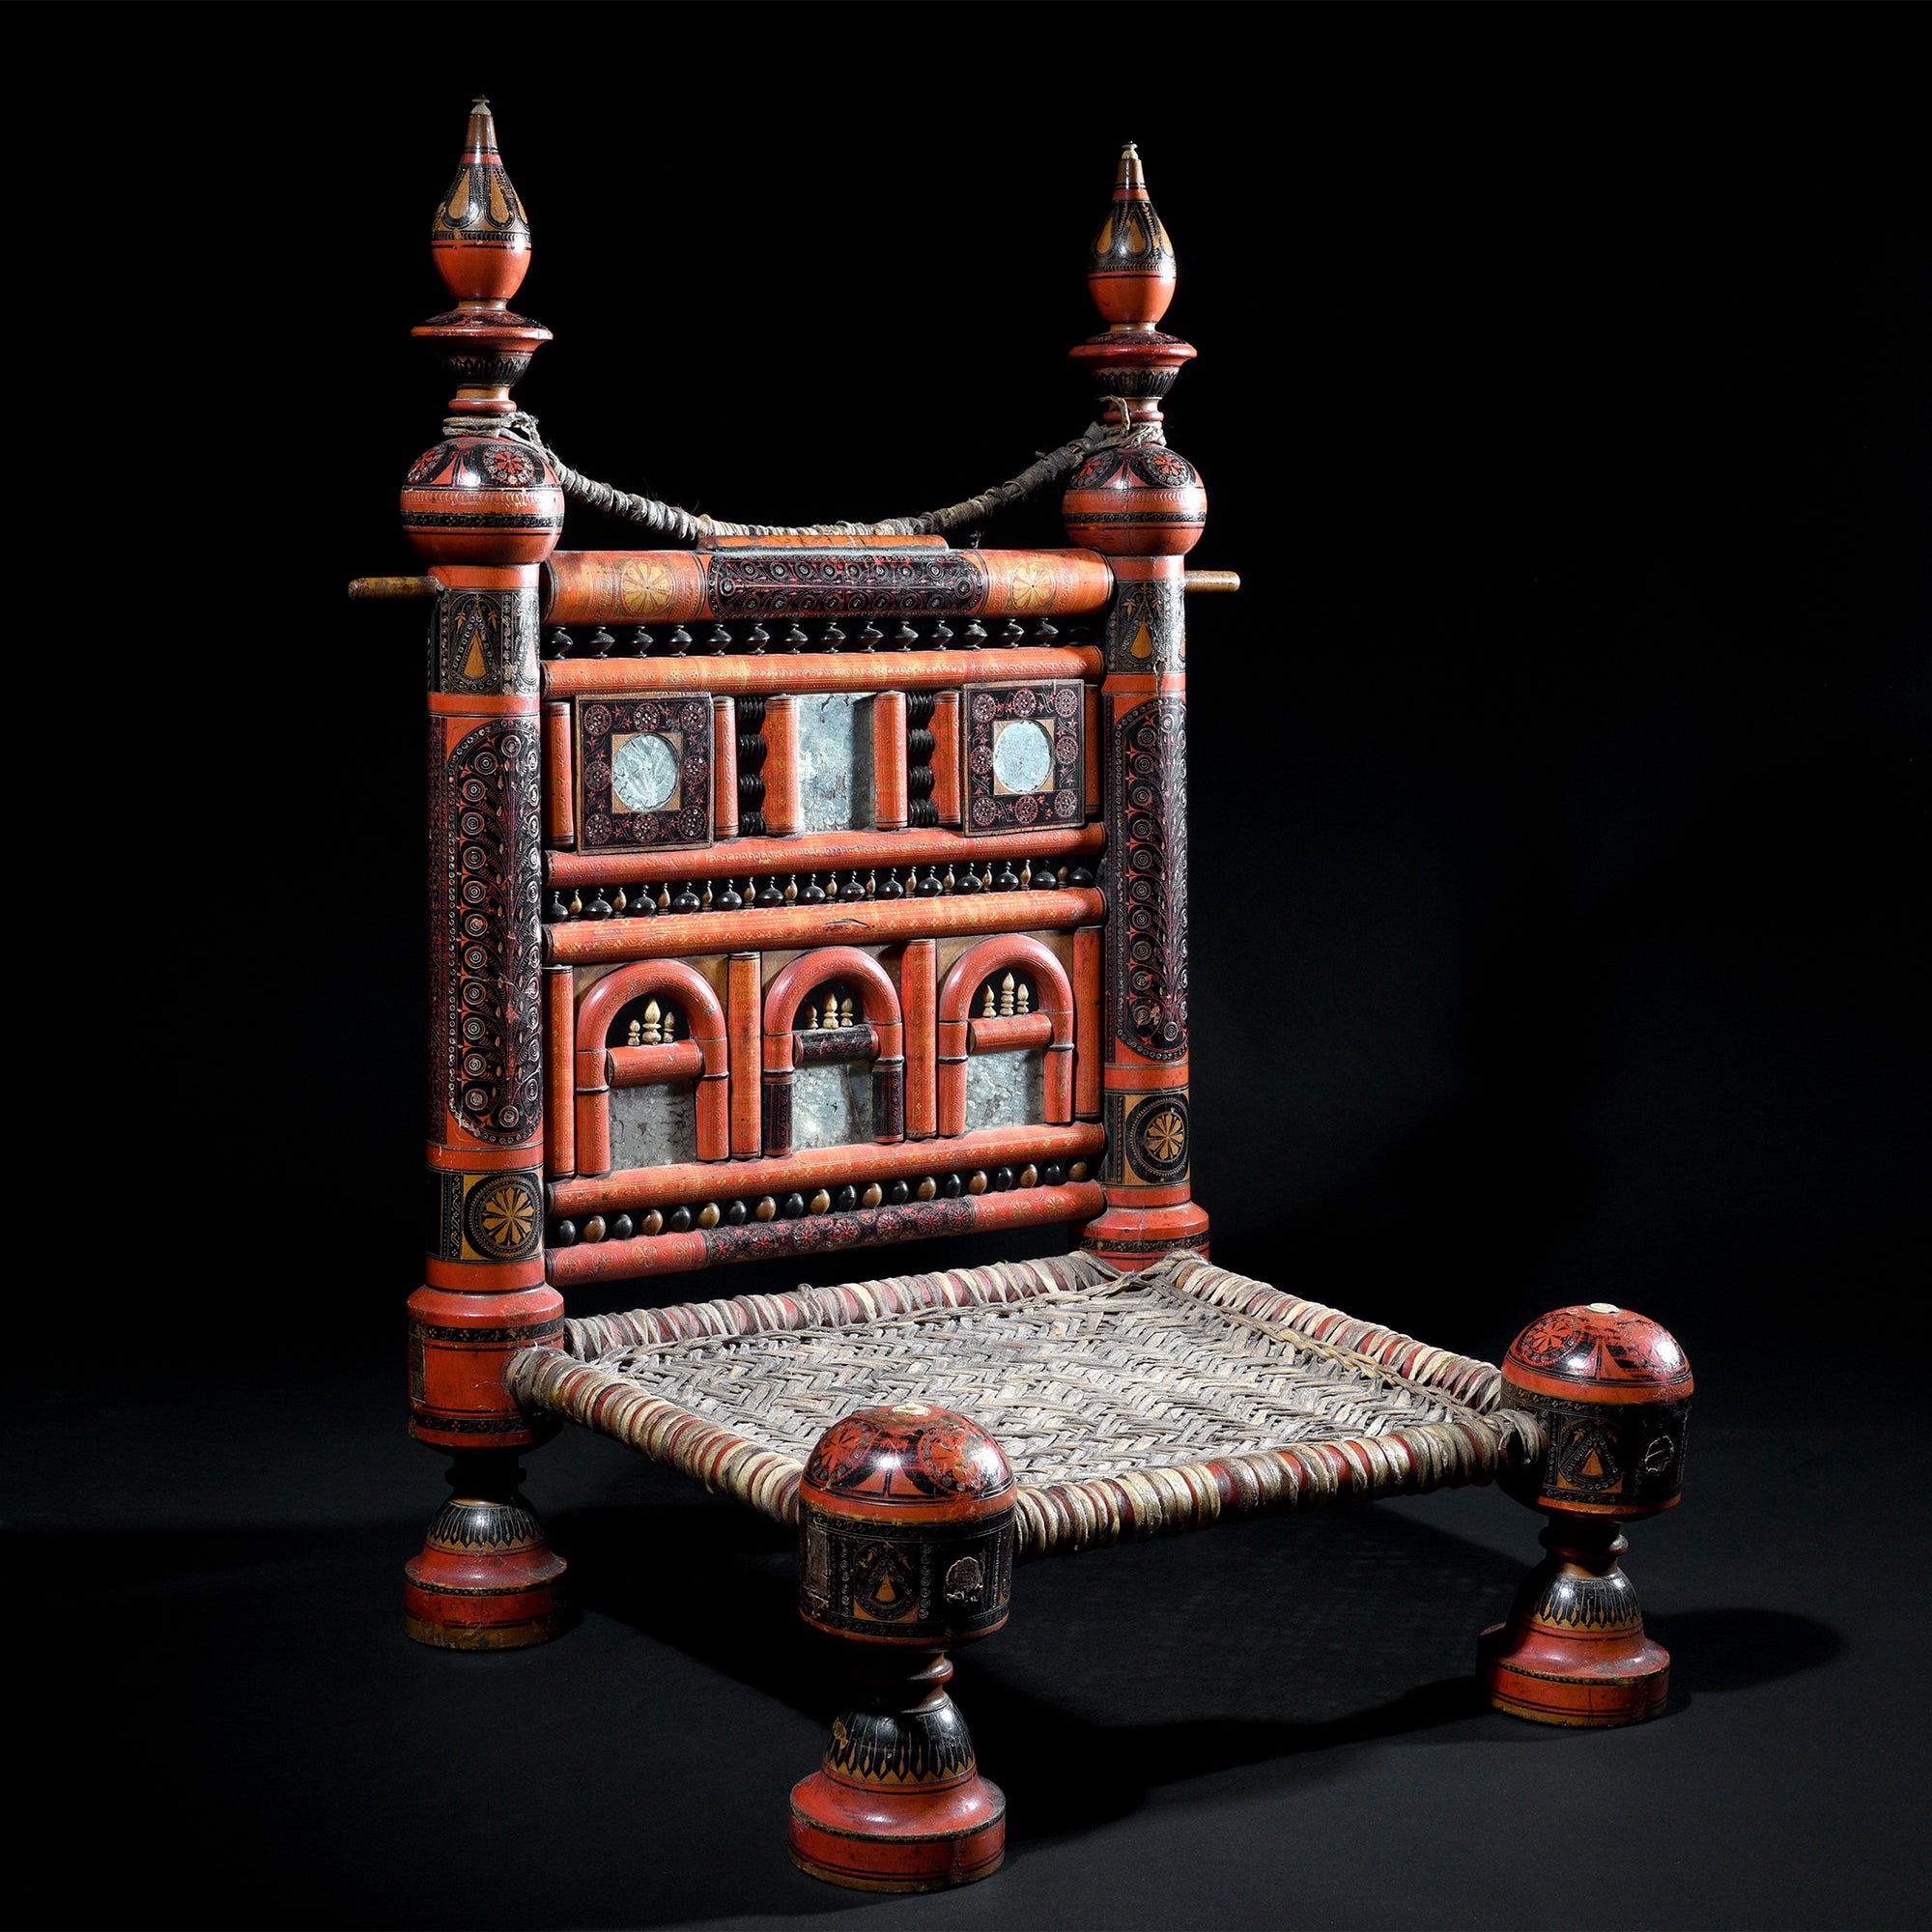 Antique Scratchwork Lacquer Pidha Chair from Chiniot, Punjab - Ca 1900| INDIGO ANTIQUES